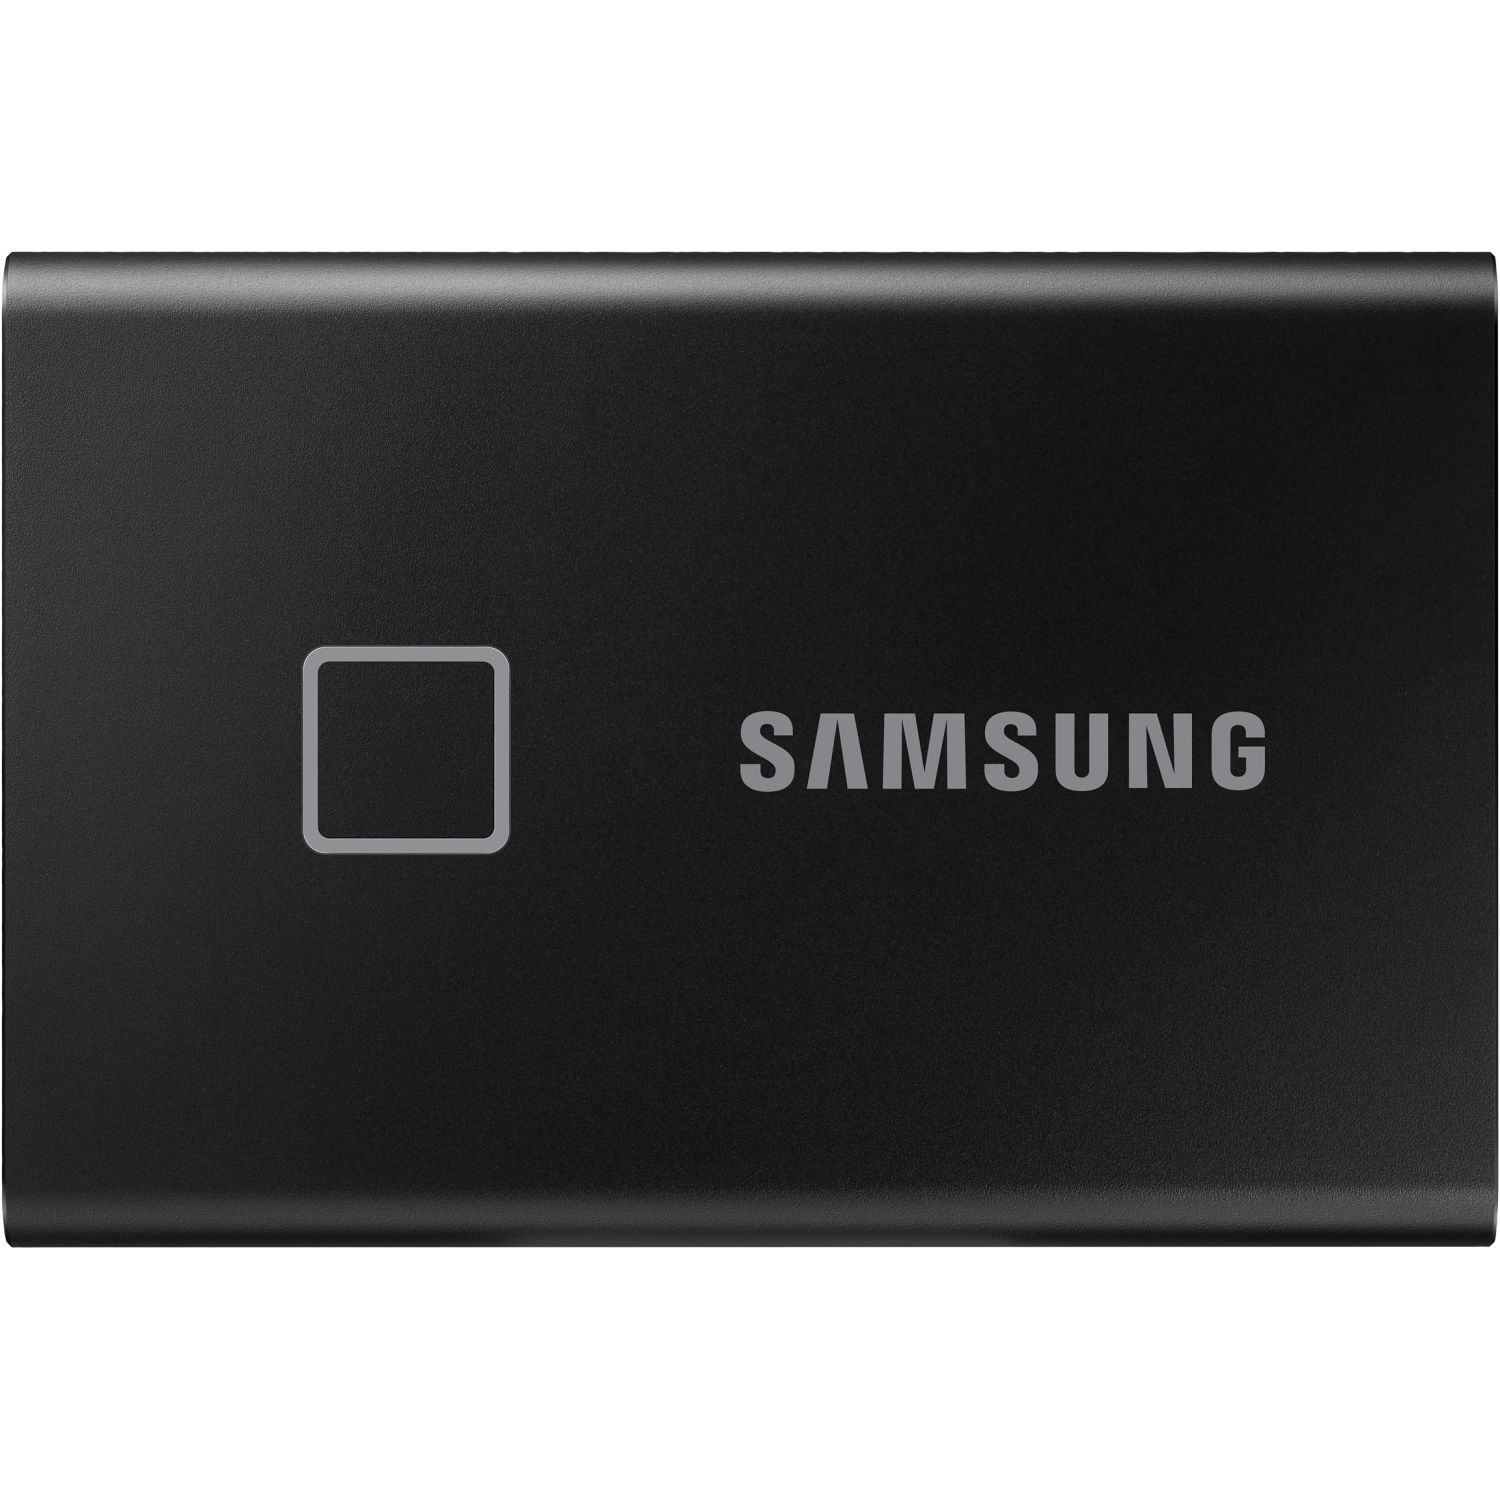 SAMSUNG T7 Touch Portable SSD 1TB - Up to 1050 MB/s - USB 3.2 External Solid State Drive, Black (MU-PC1T0K/WW)